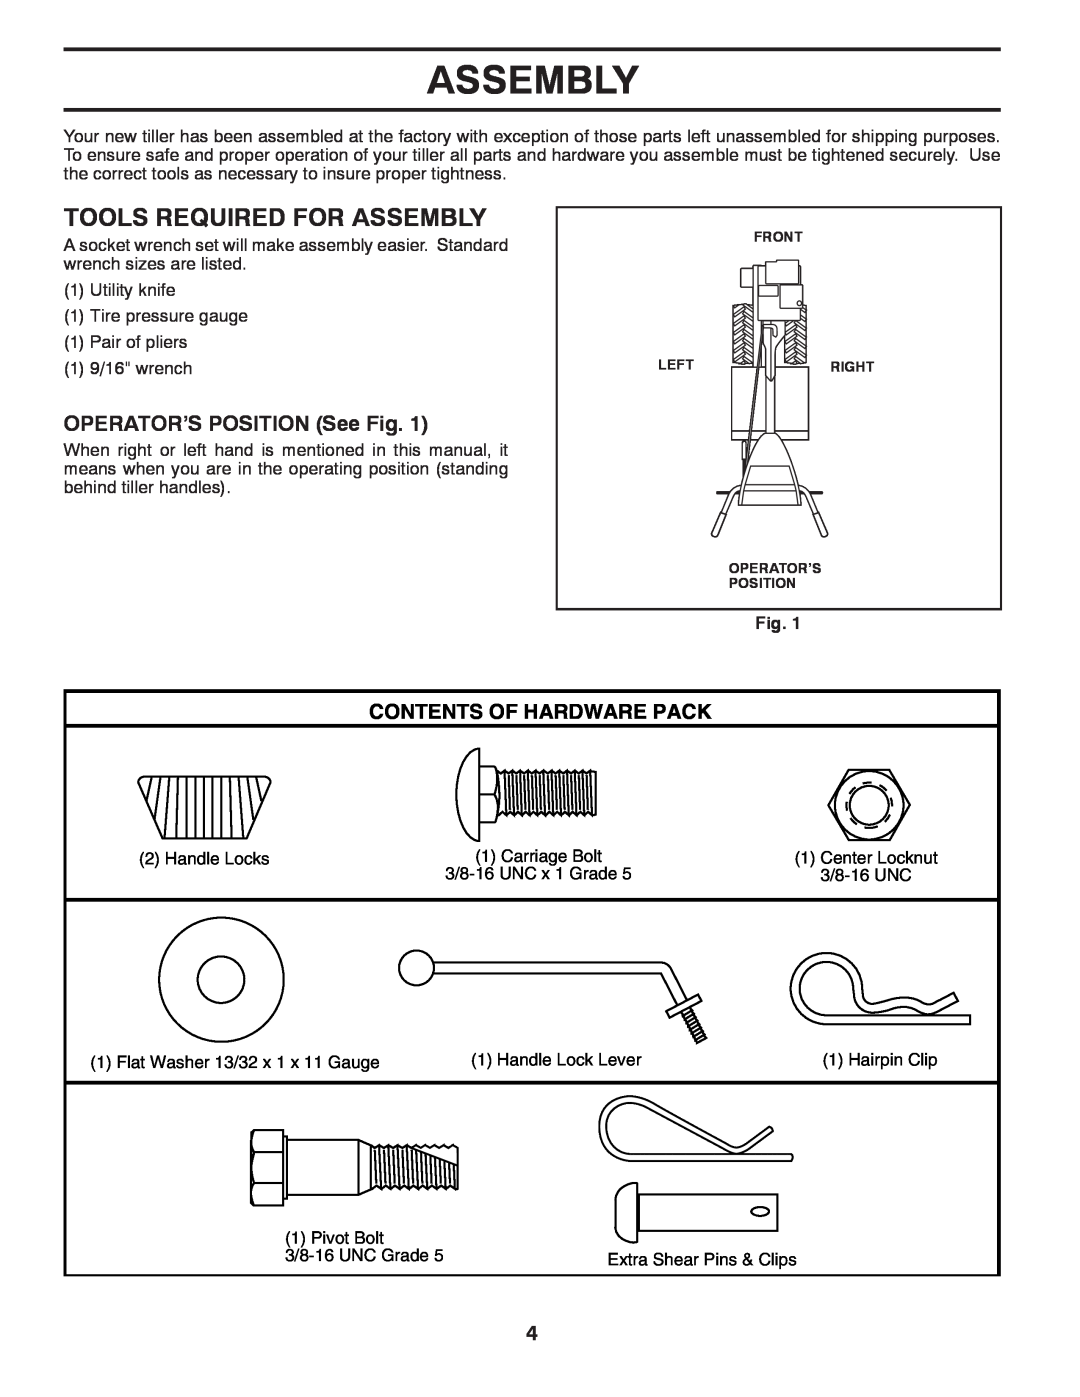 Poulan 433107, 96092002200 manual Tools Required For Assembly, OPERATOR’S POSITION See Fig, Contents Of Hardware Pack 